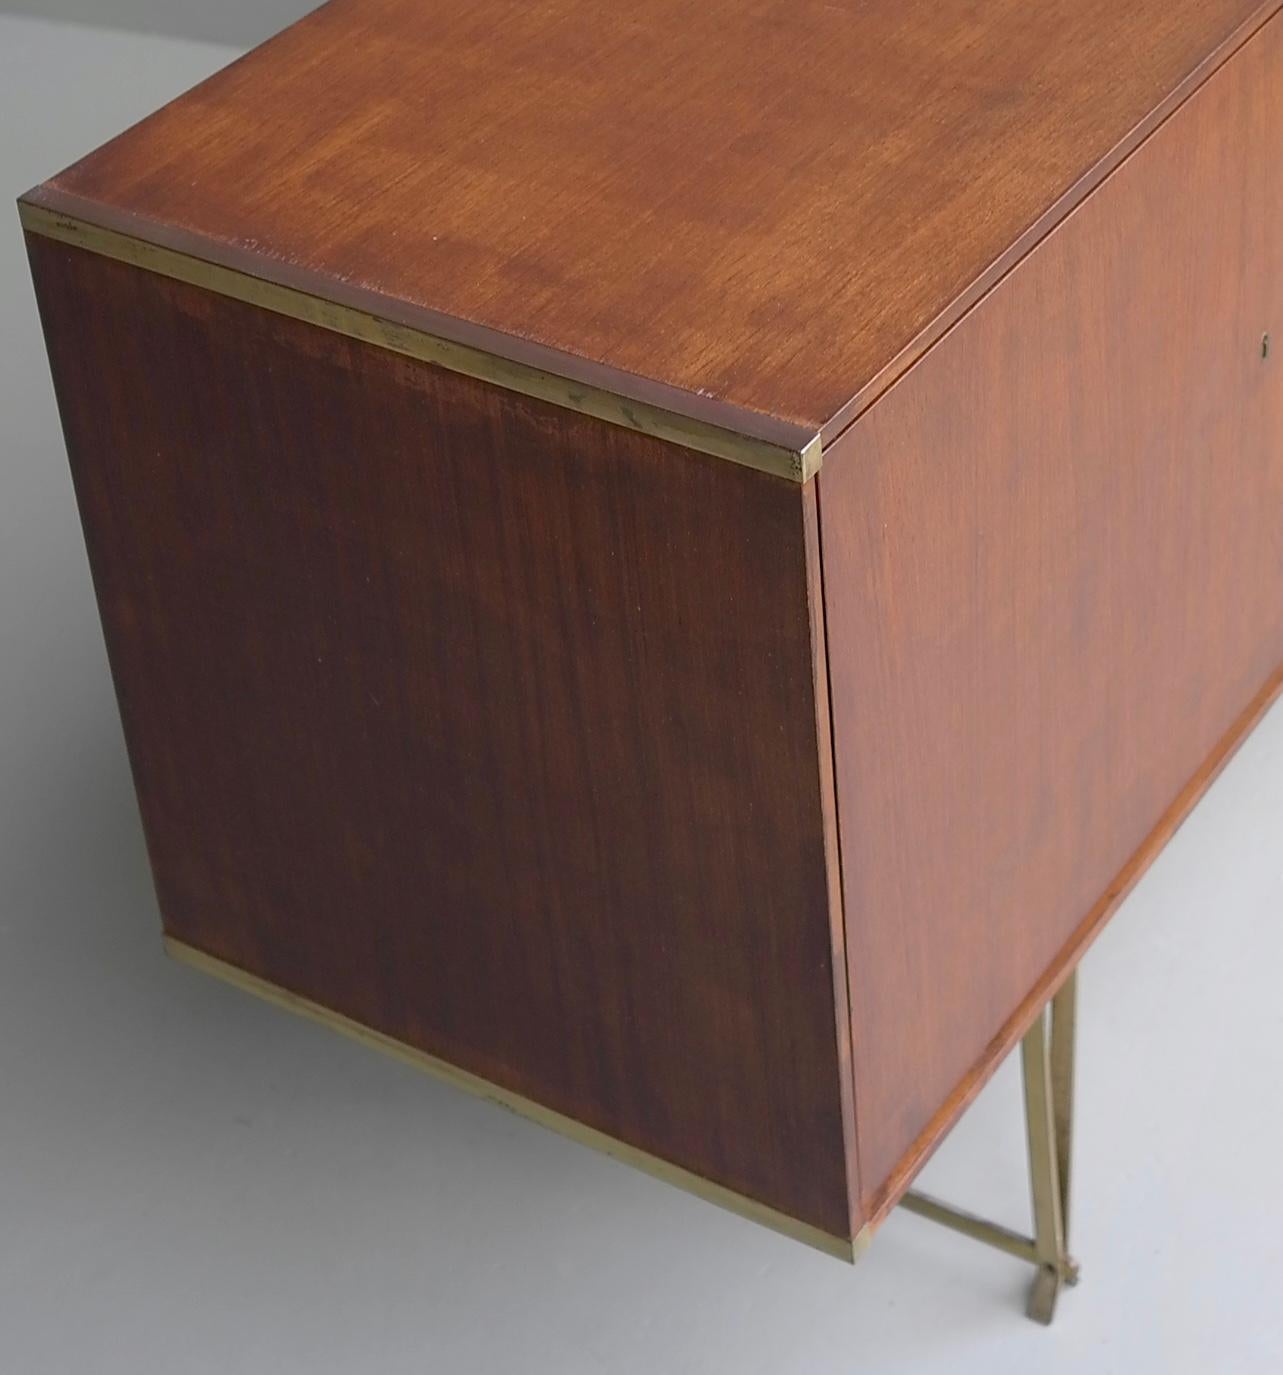 Fristho Sideboard by Wim Crouwel in Teak and White, with Fine Brass Leggs, 1954 3